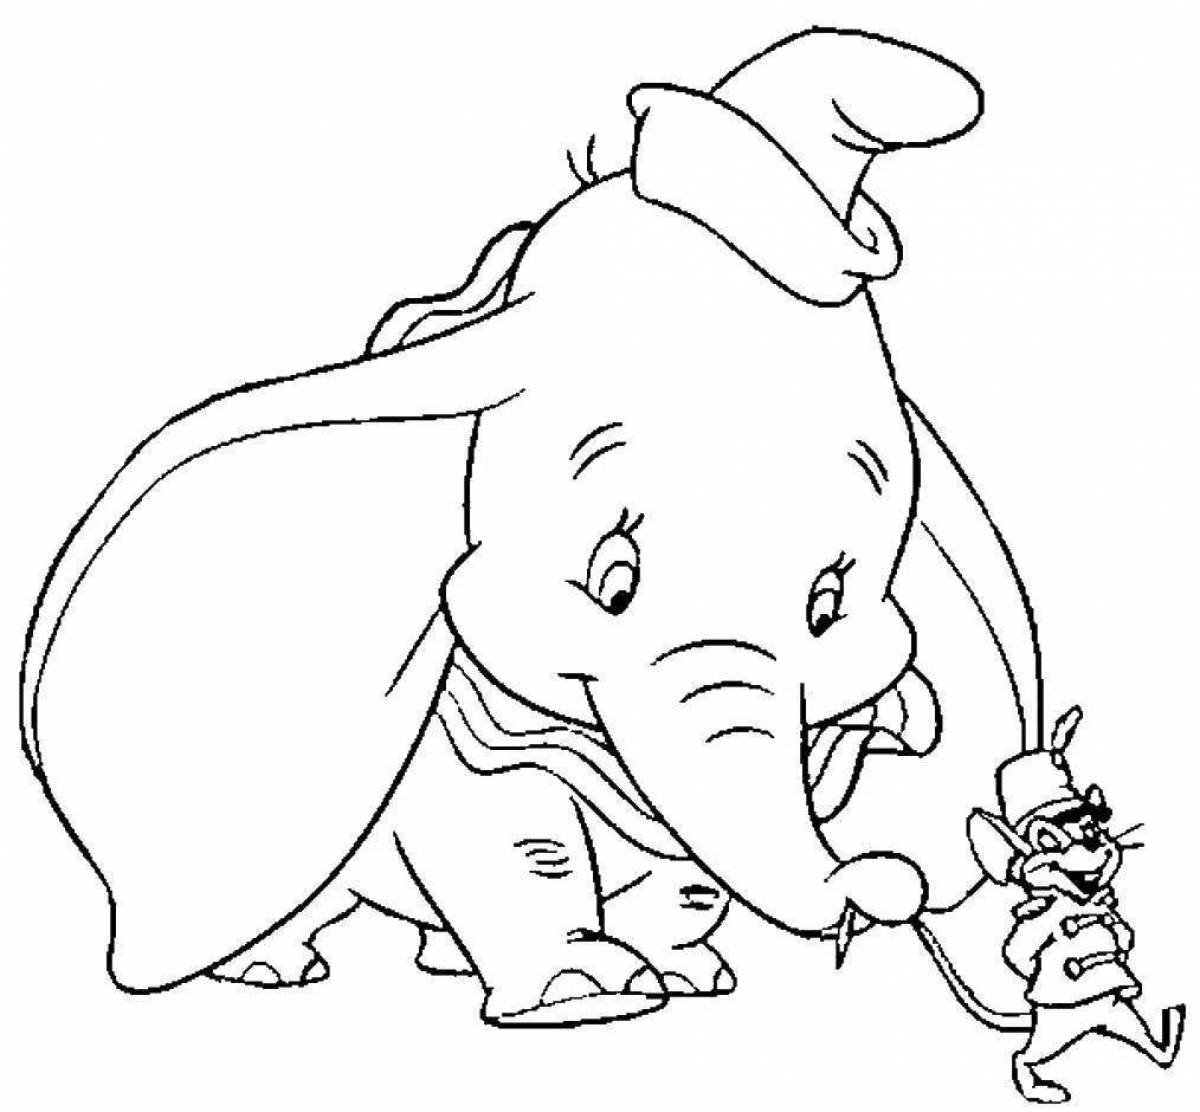 Radiant jumbo coloring page